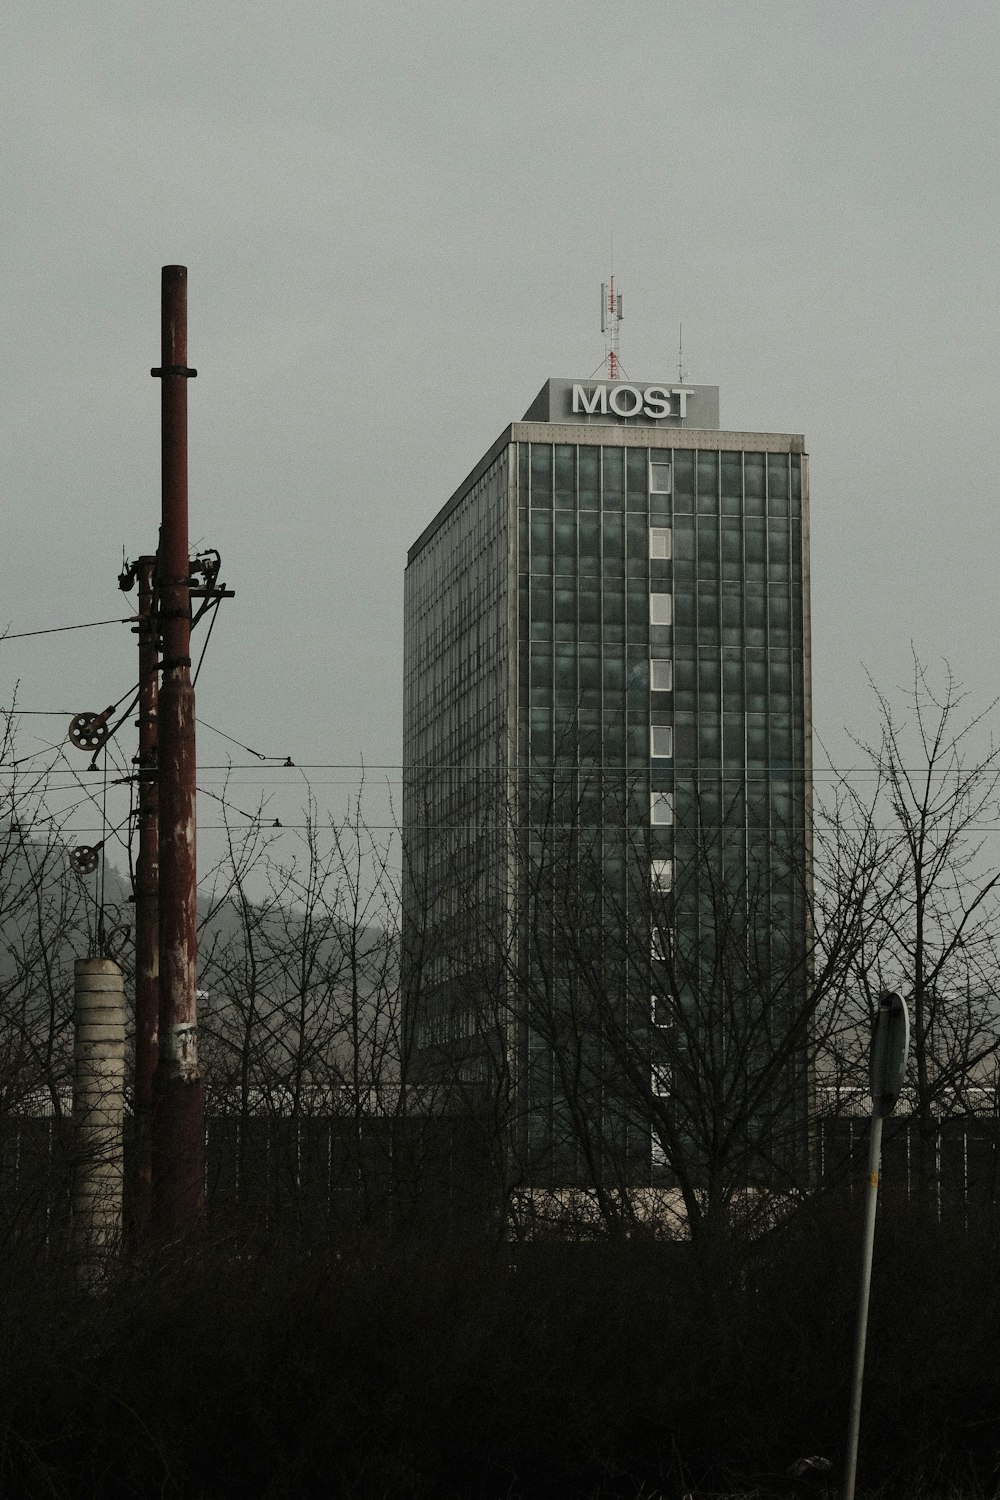 a tall building with a most sign on top of it